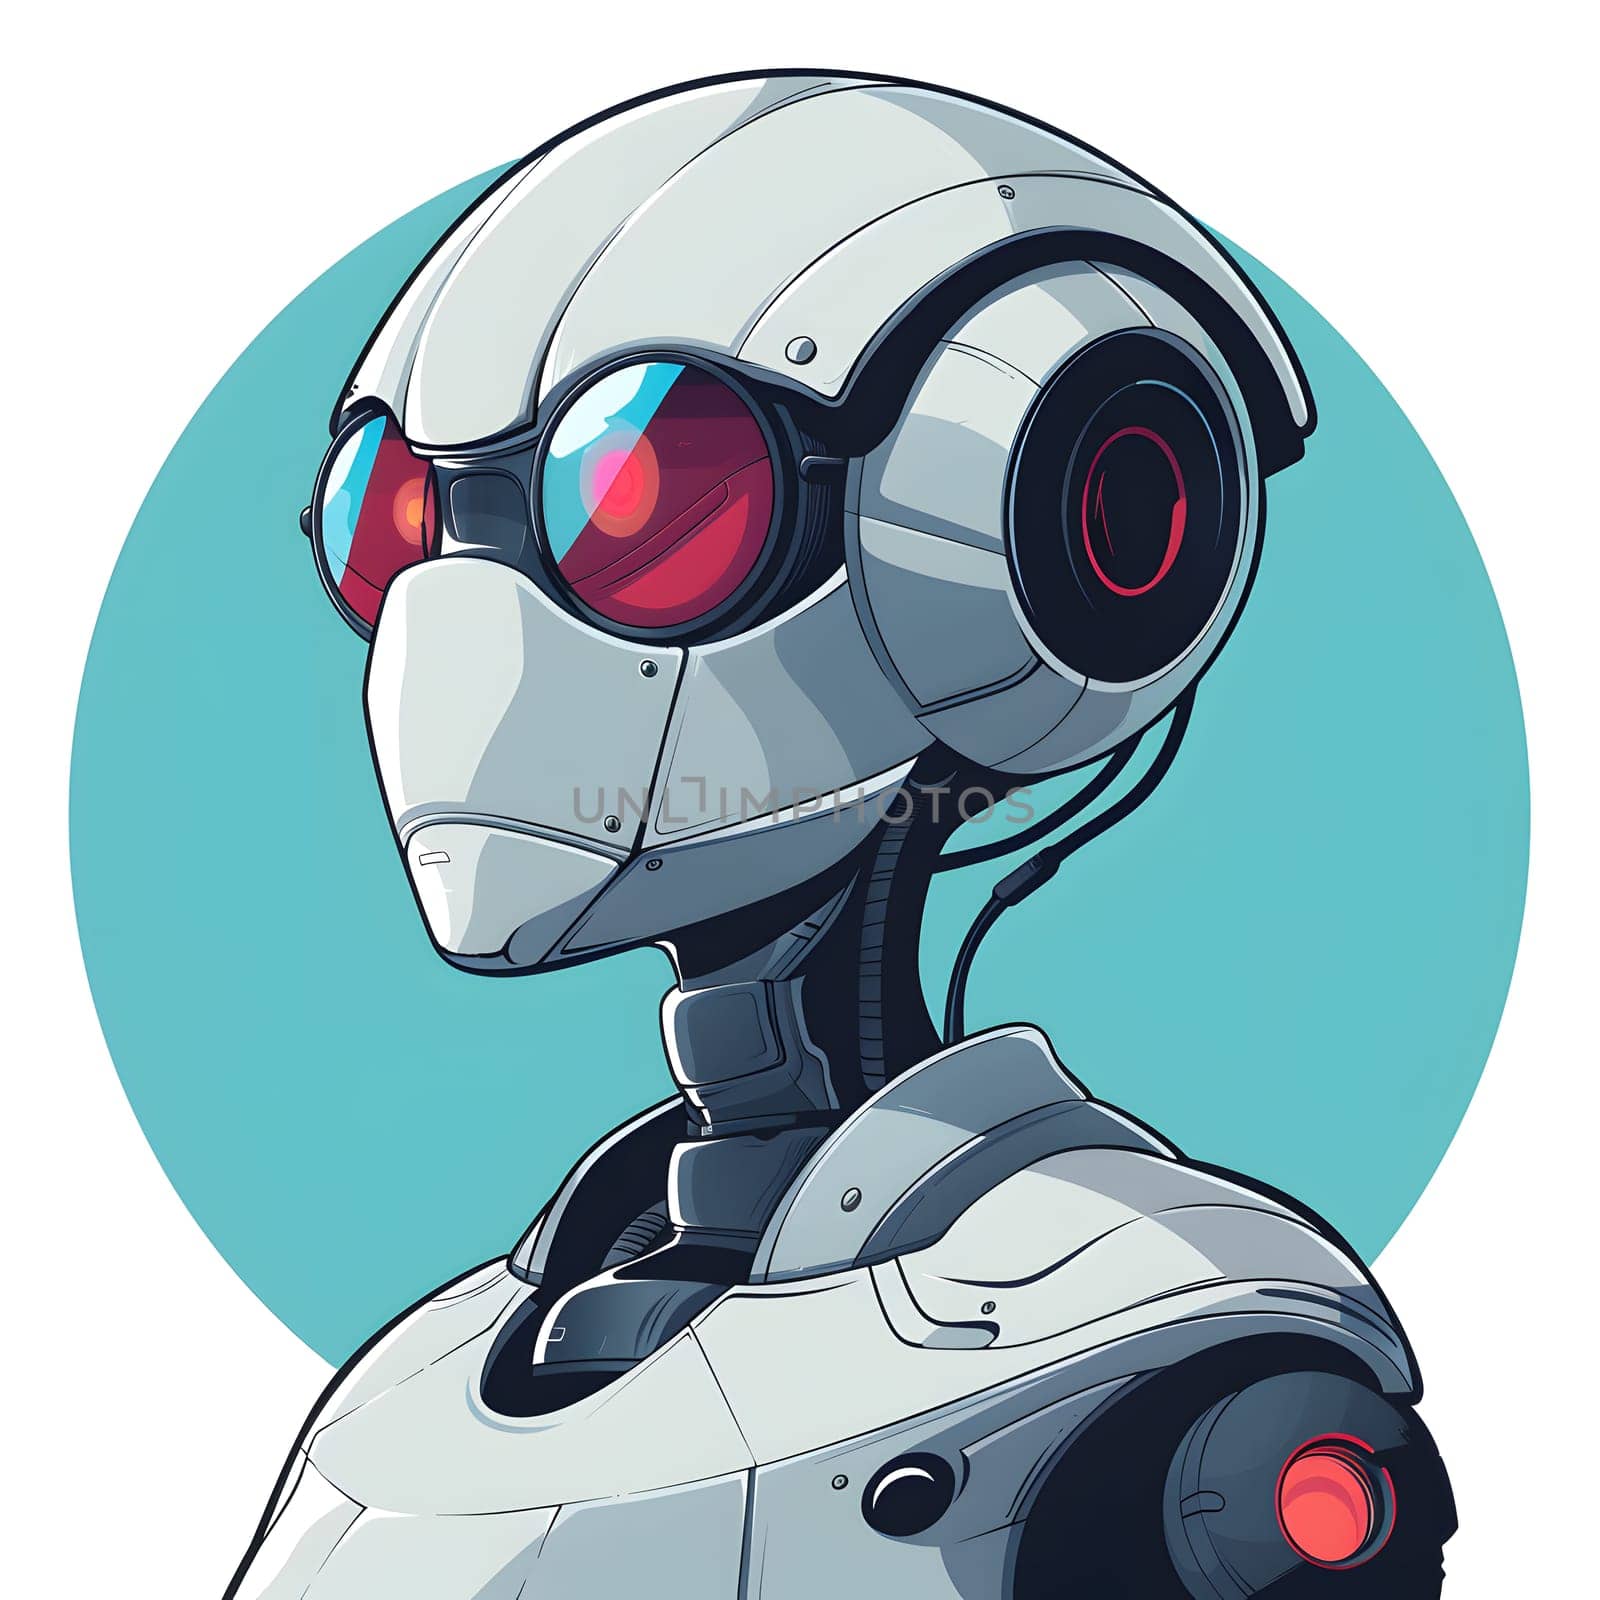 A robot with sunglasses and headphones in a cartoon illustration by Nadtochiy